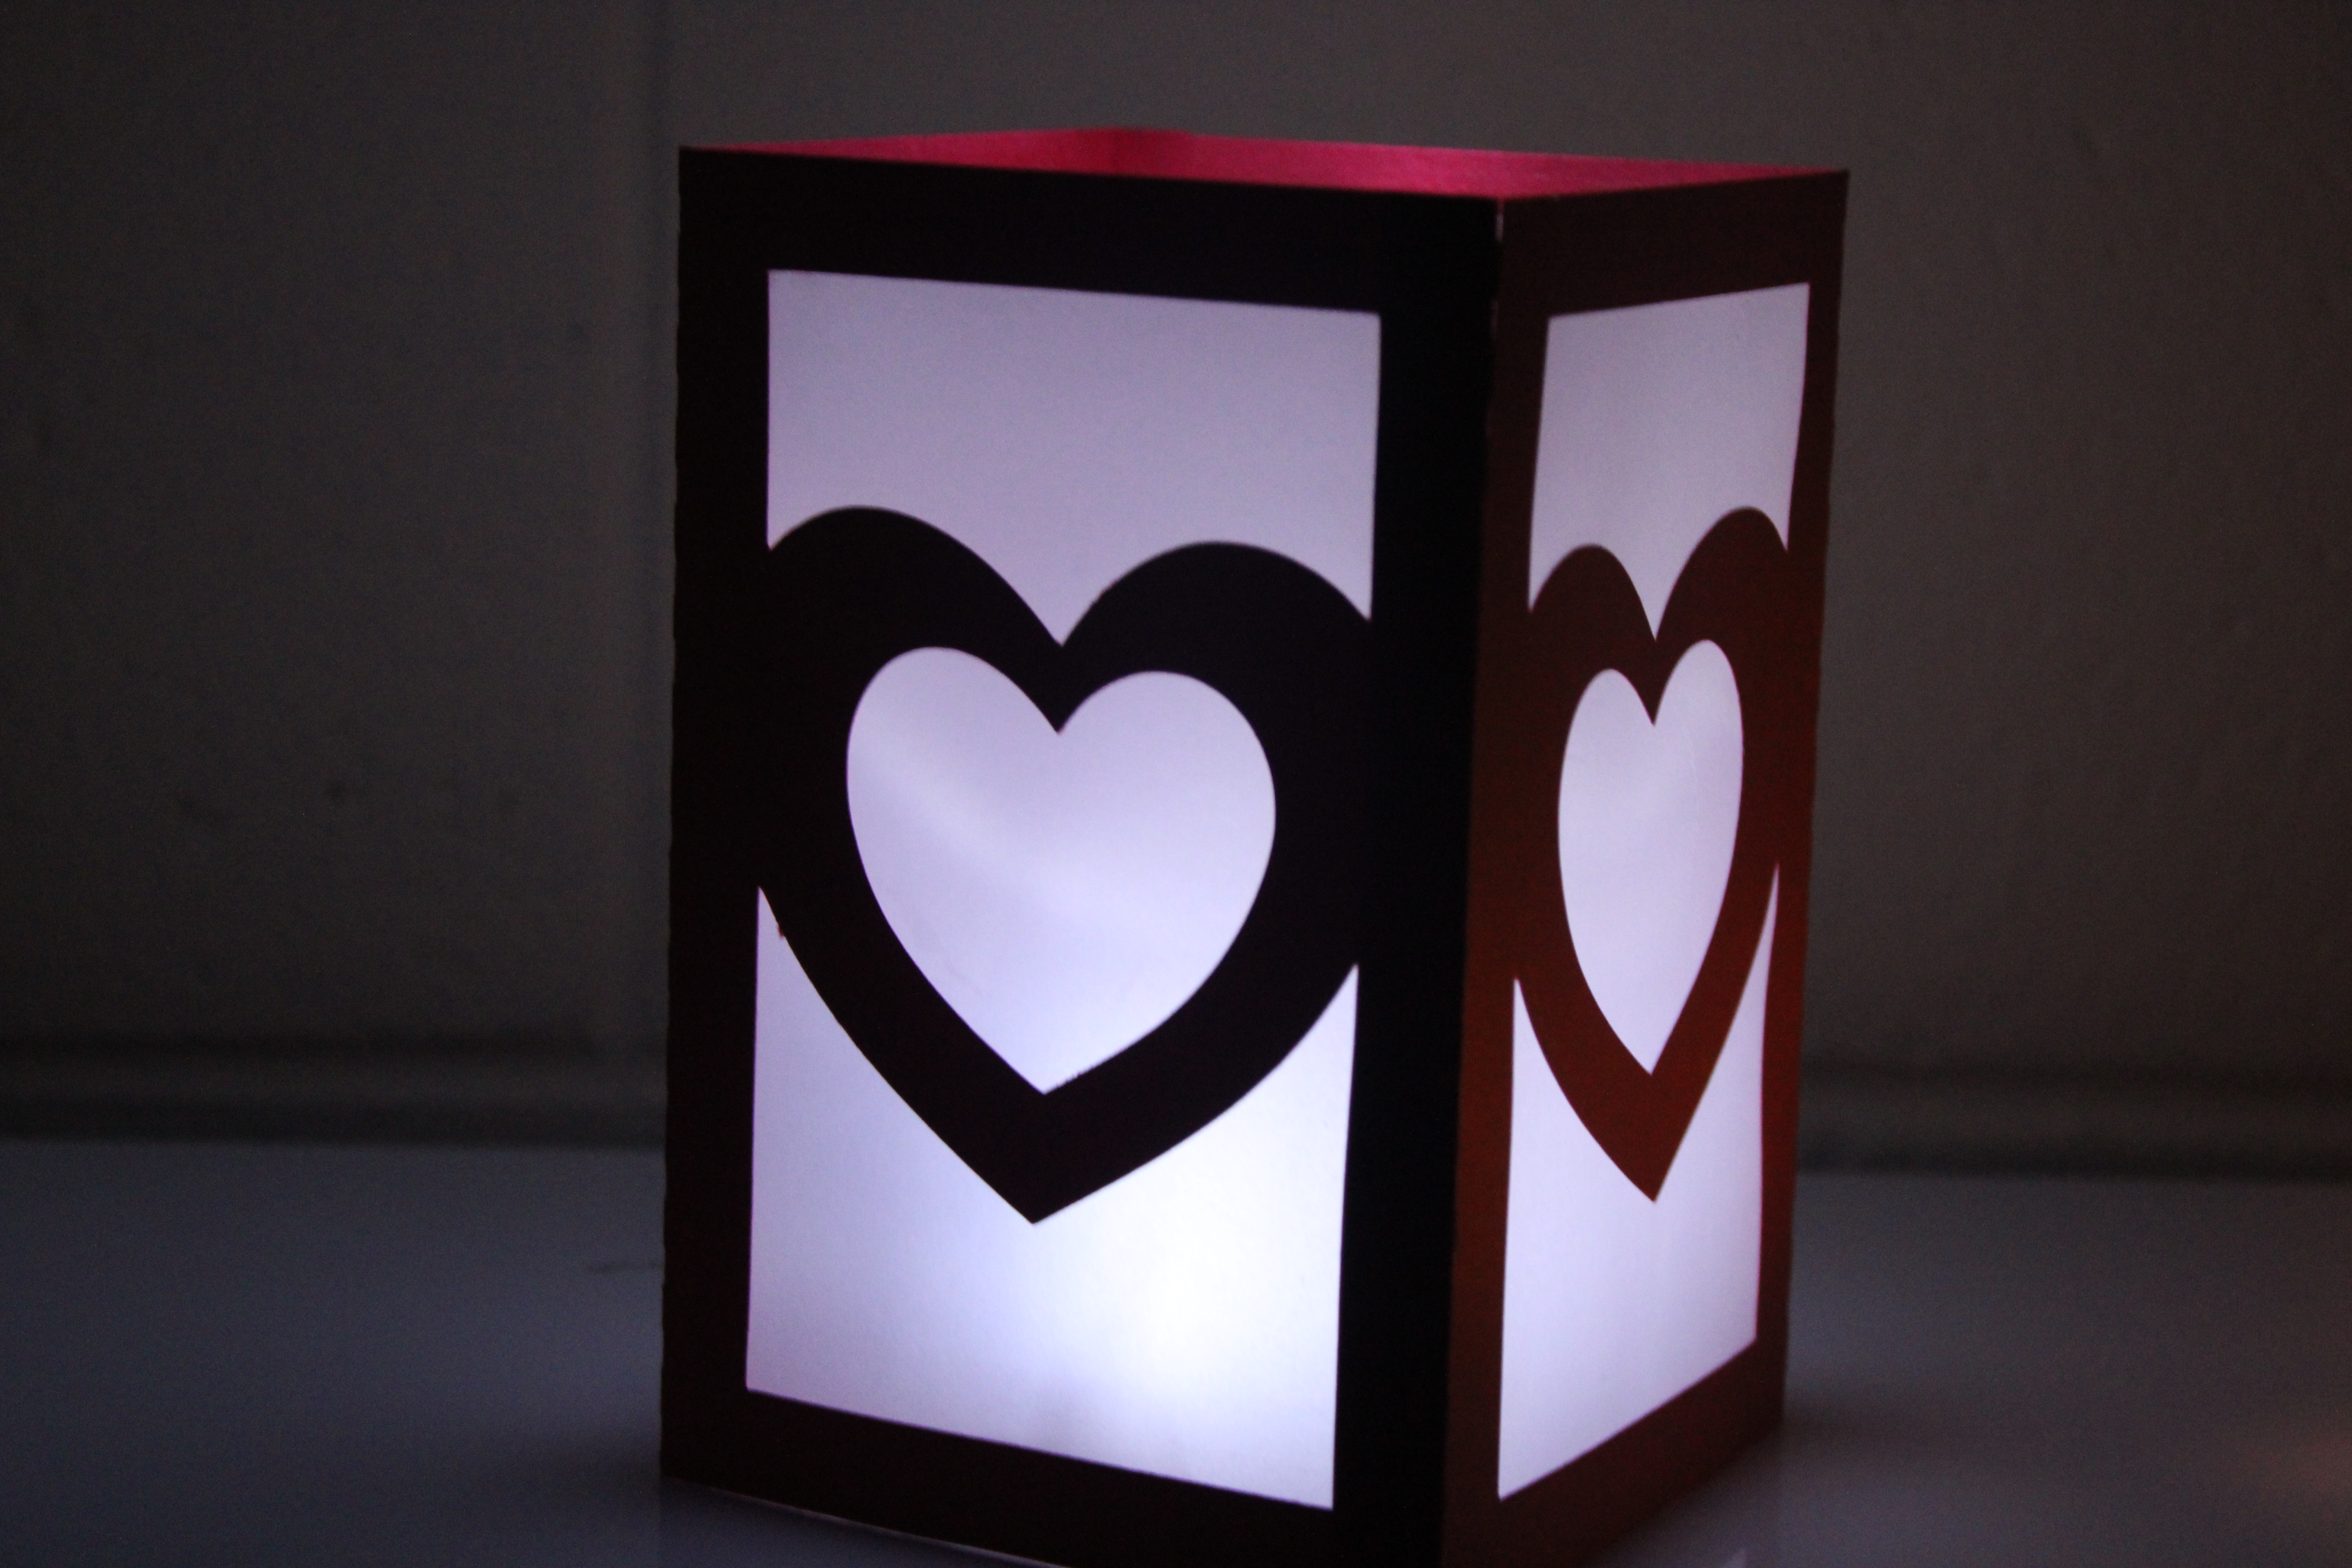 red four sided paper luminary with vellum windows. heart in the center of each side of the luminary.